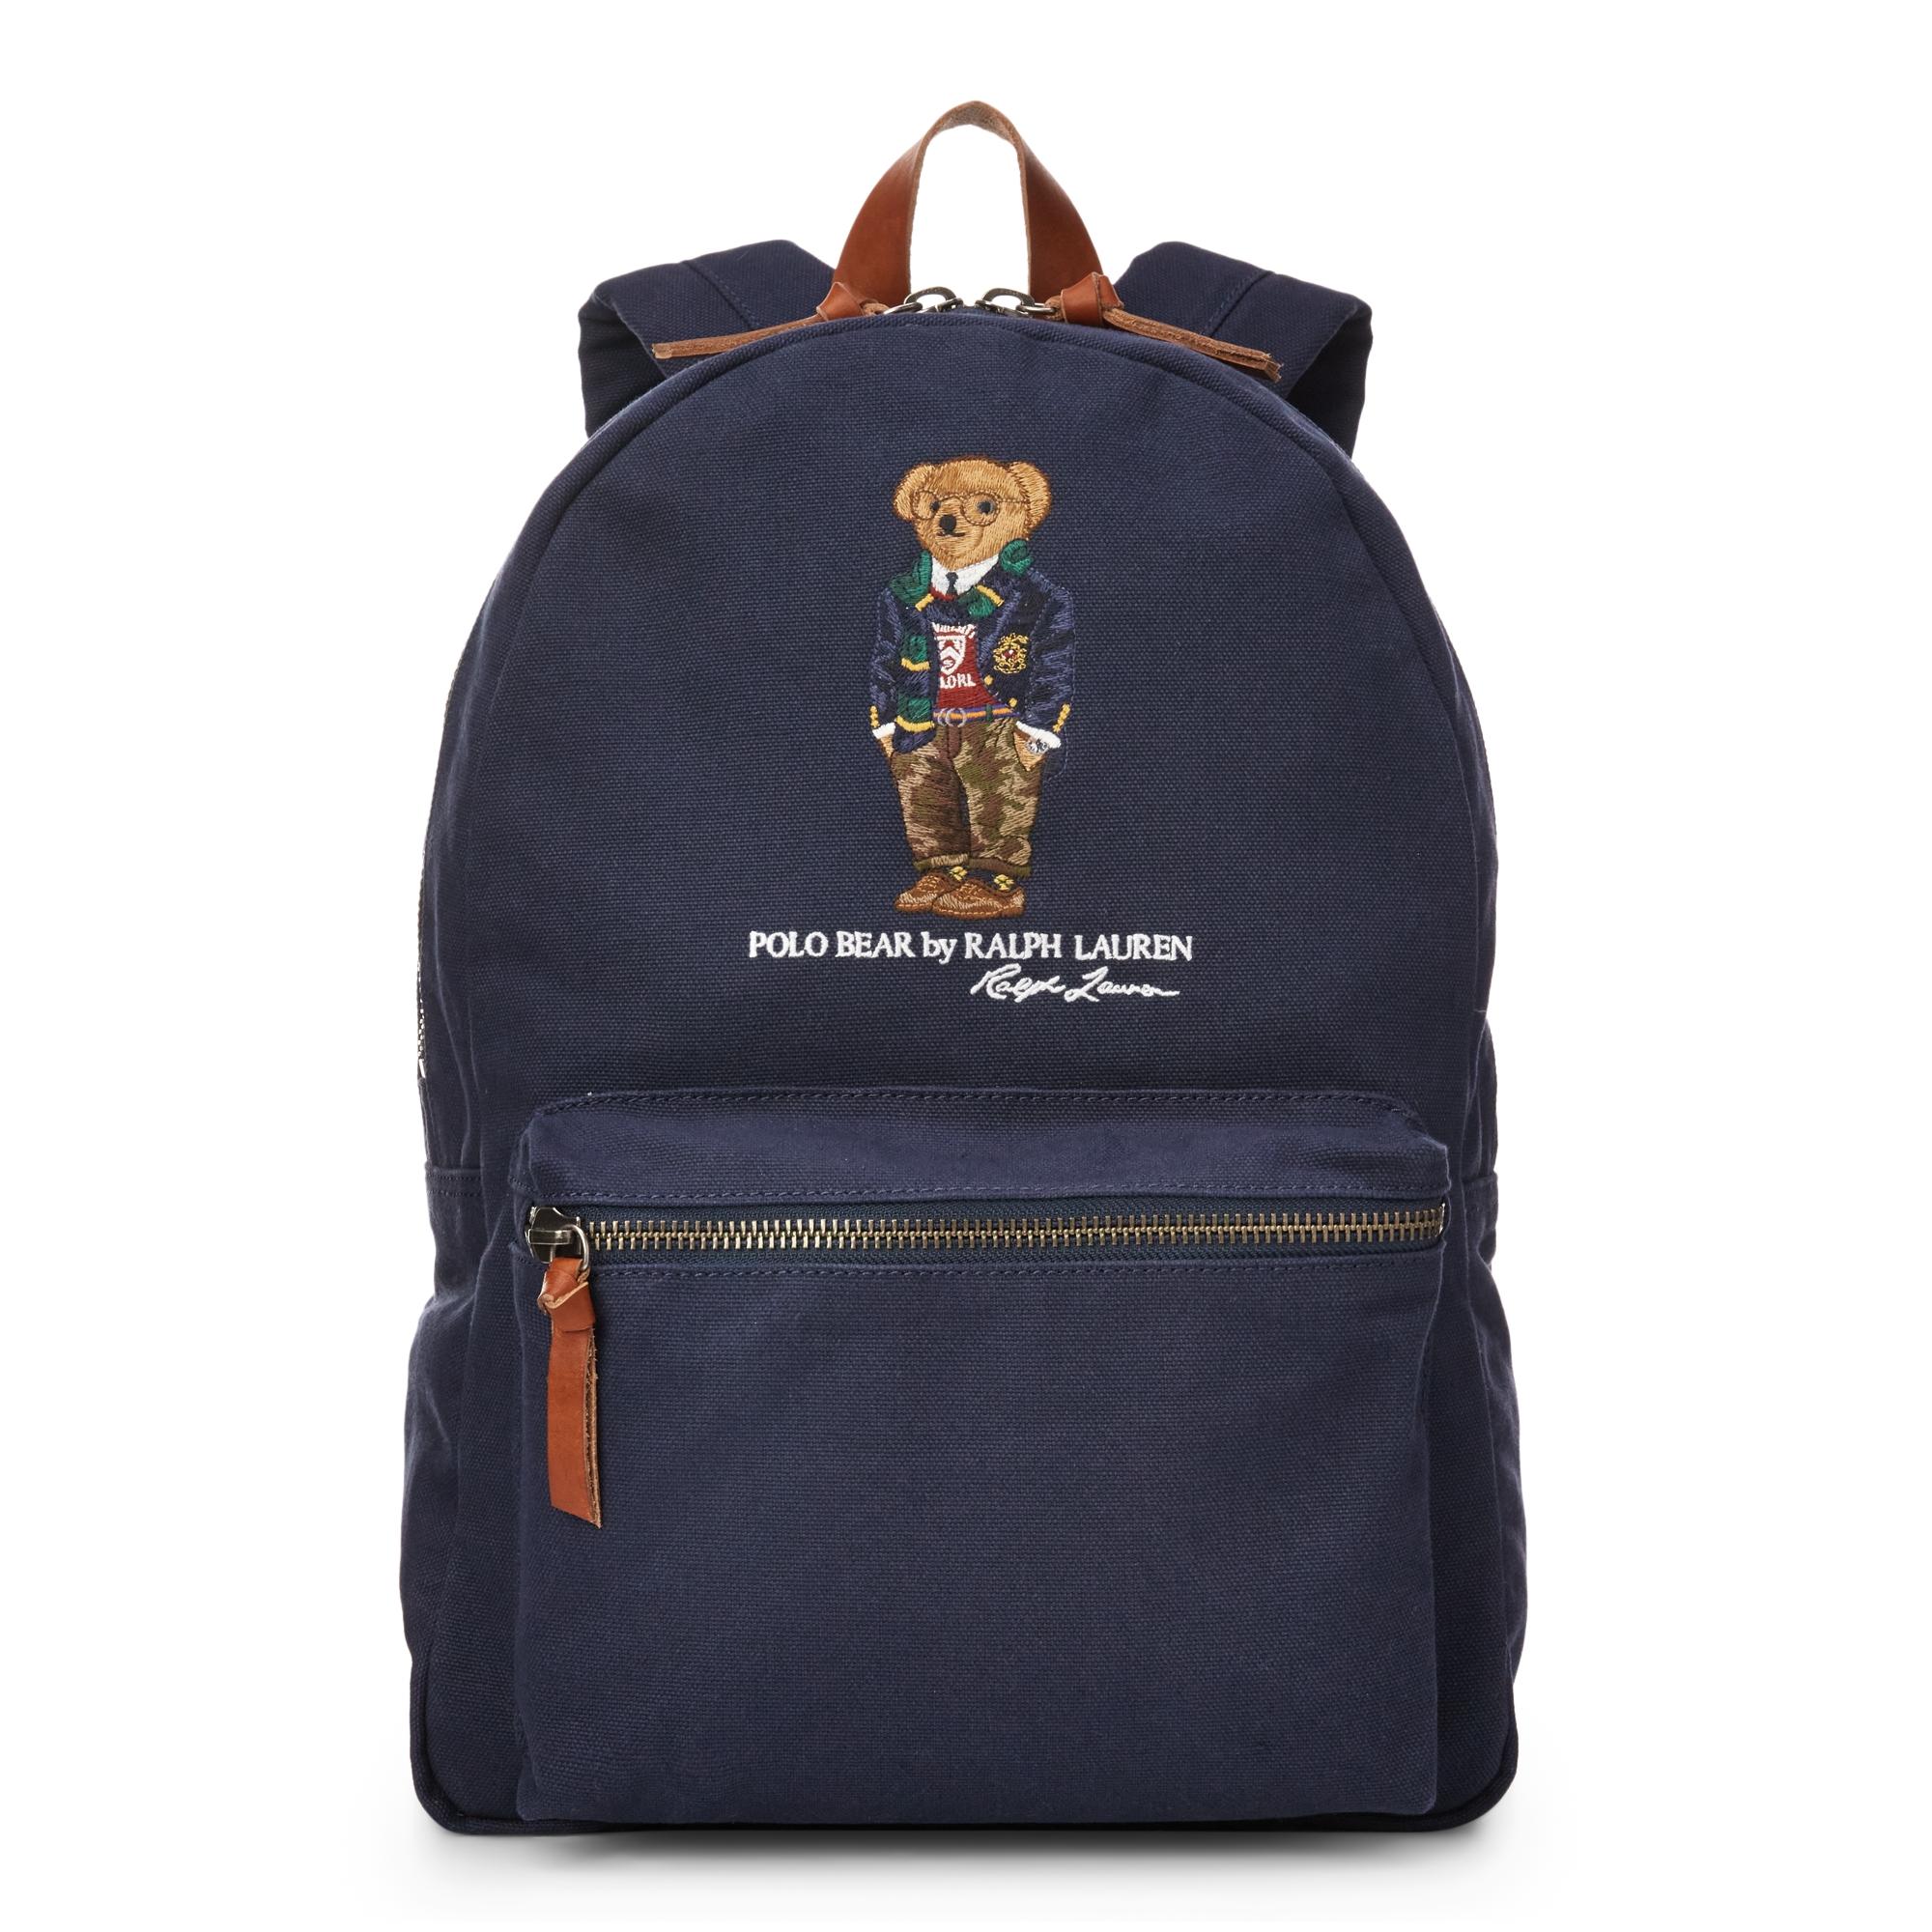 Polo Ralph Lauren Polo Bear Canvas Backpack in Navy (Blue) for Men - Lyst